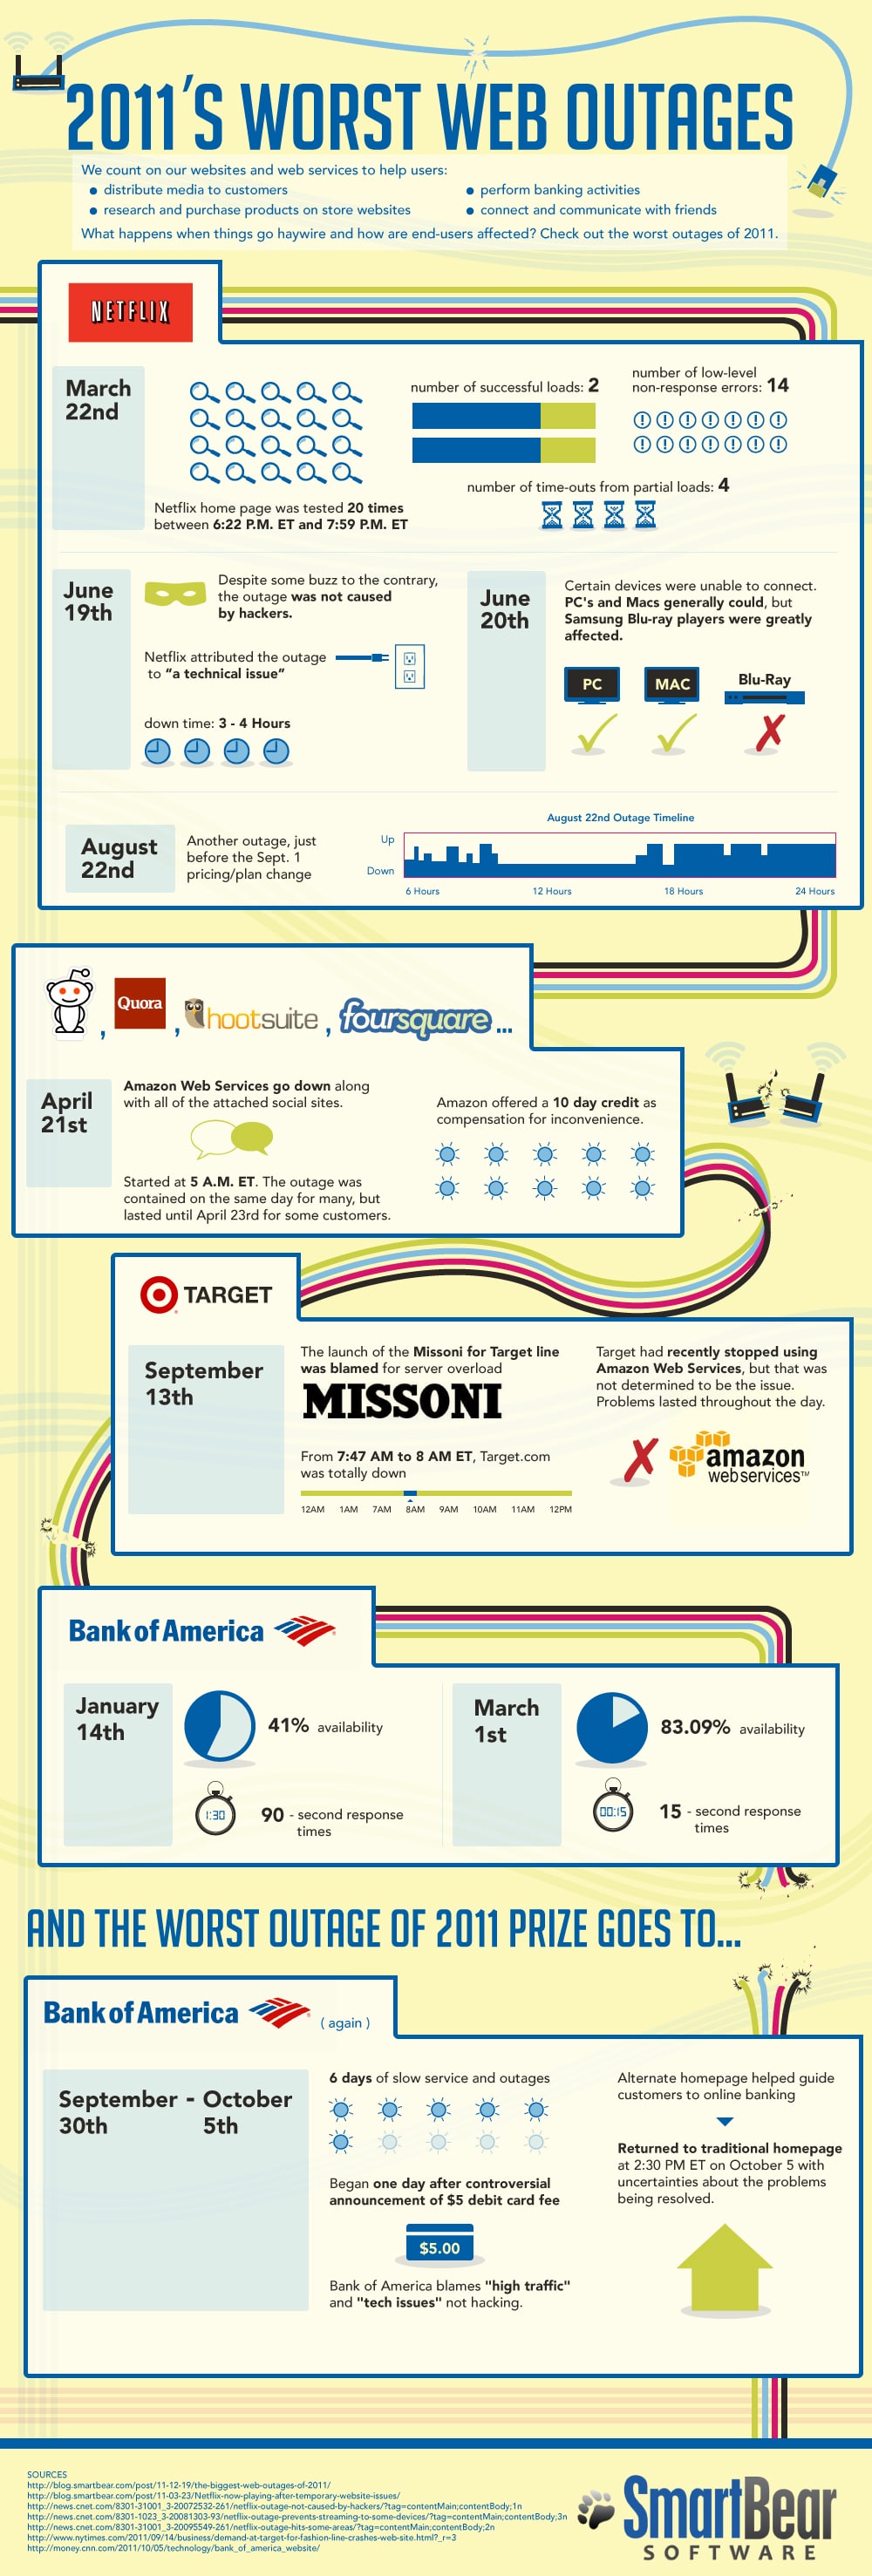 Worst Web Outages In 2011